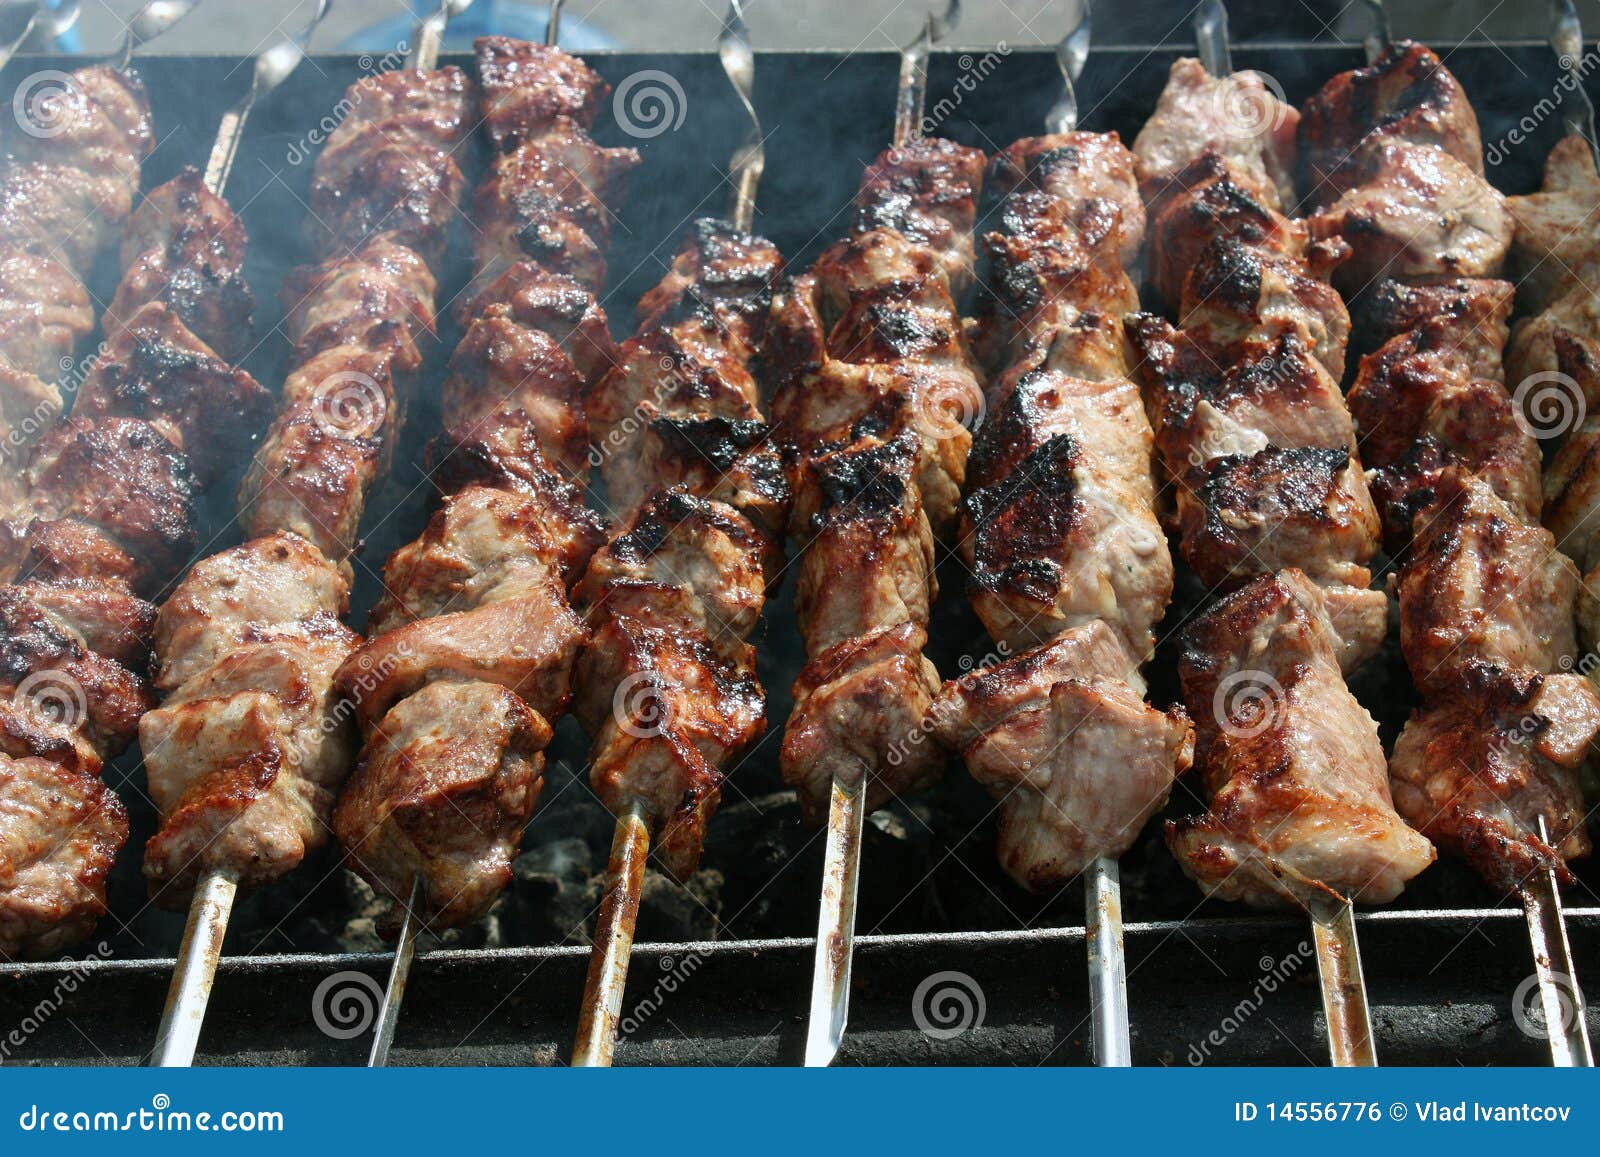 The meat on skewer. stock photo. Image of grill, lunch - 14556776